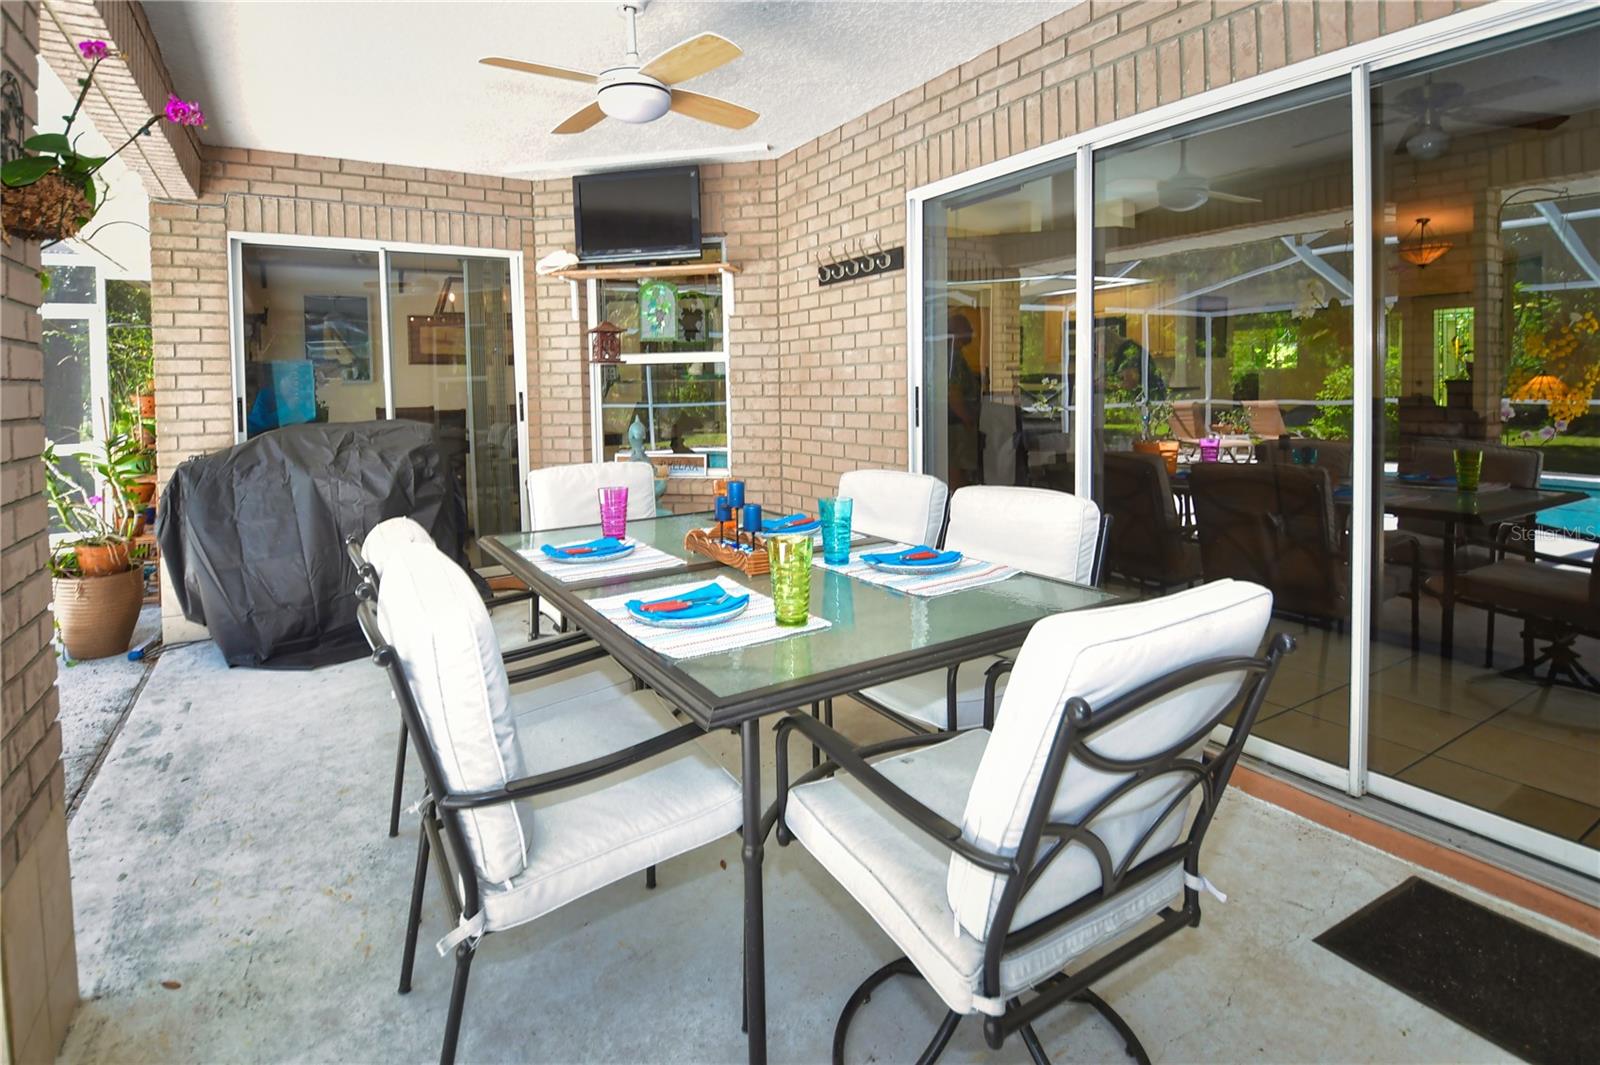 Outdoor Dining and Entertaining